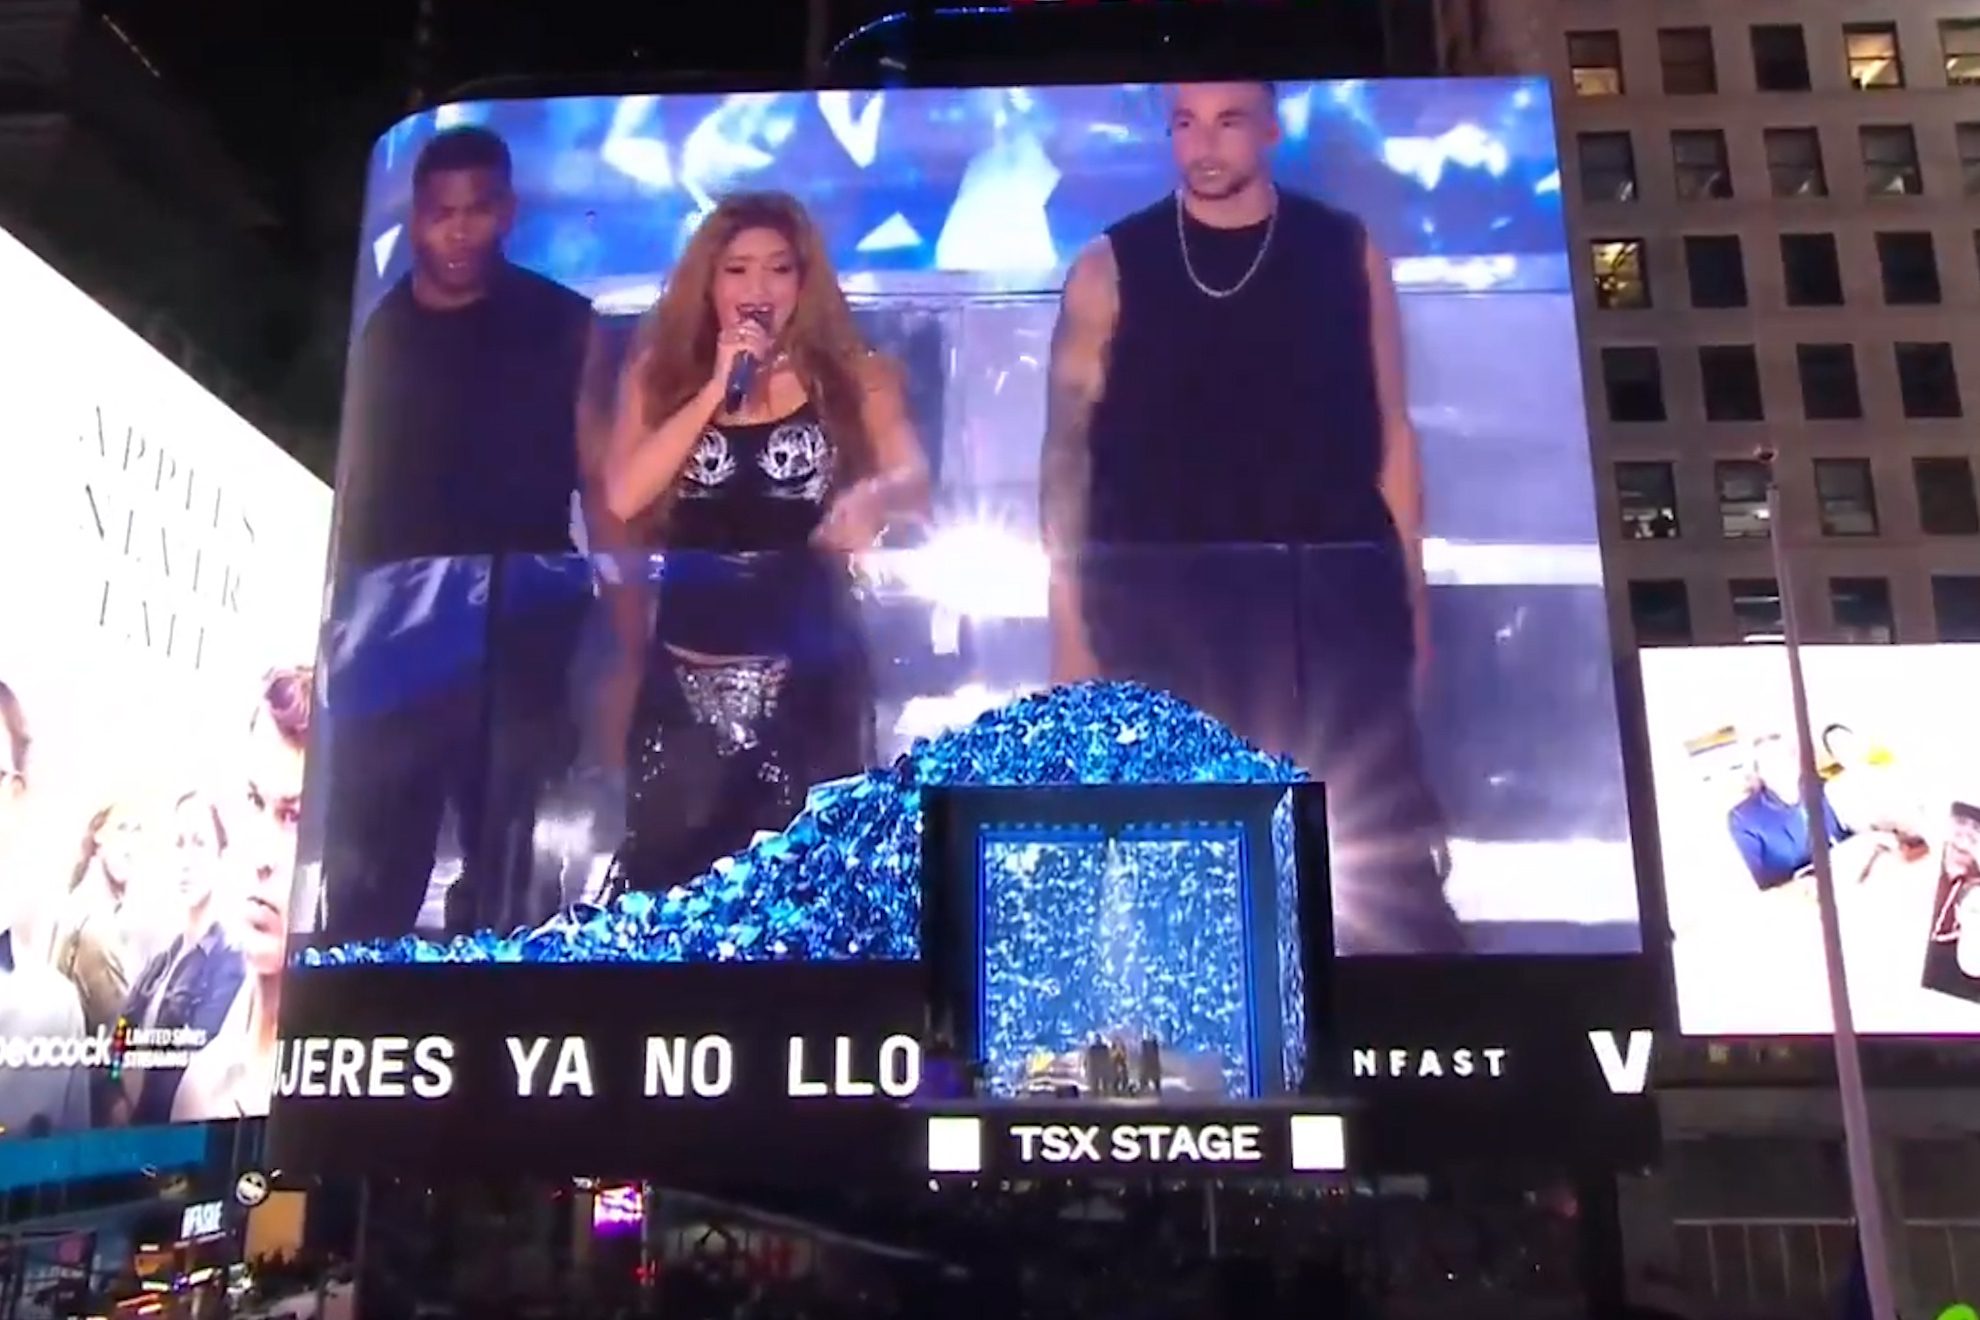 Shakira lights up Times Square with spectacular free concert that thrills fans